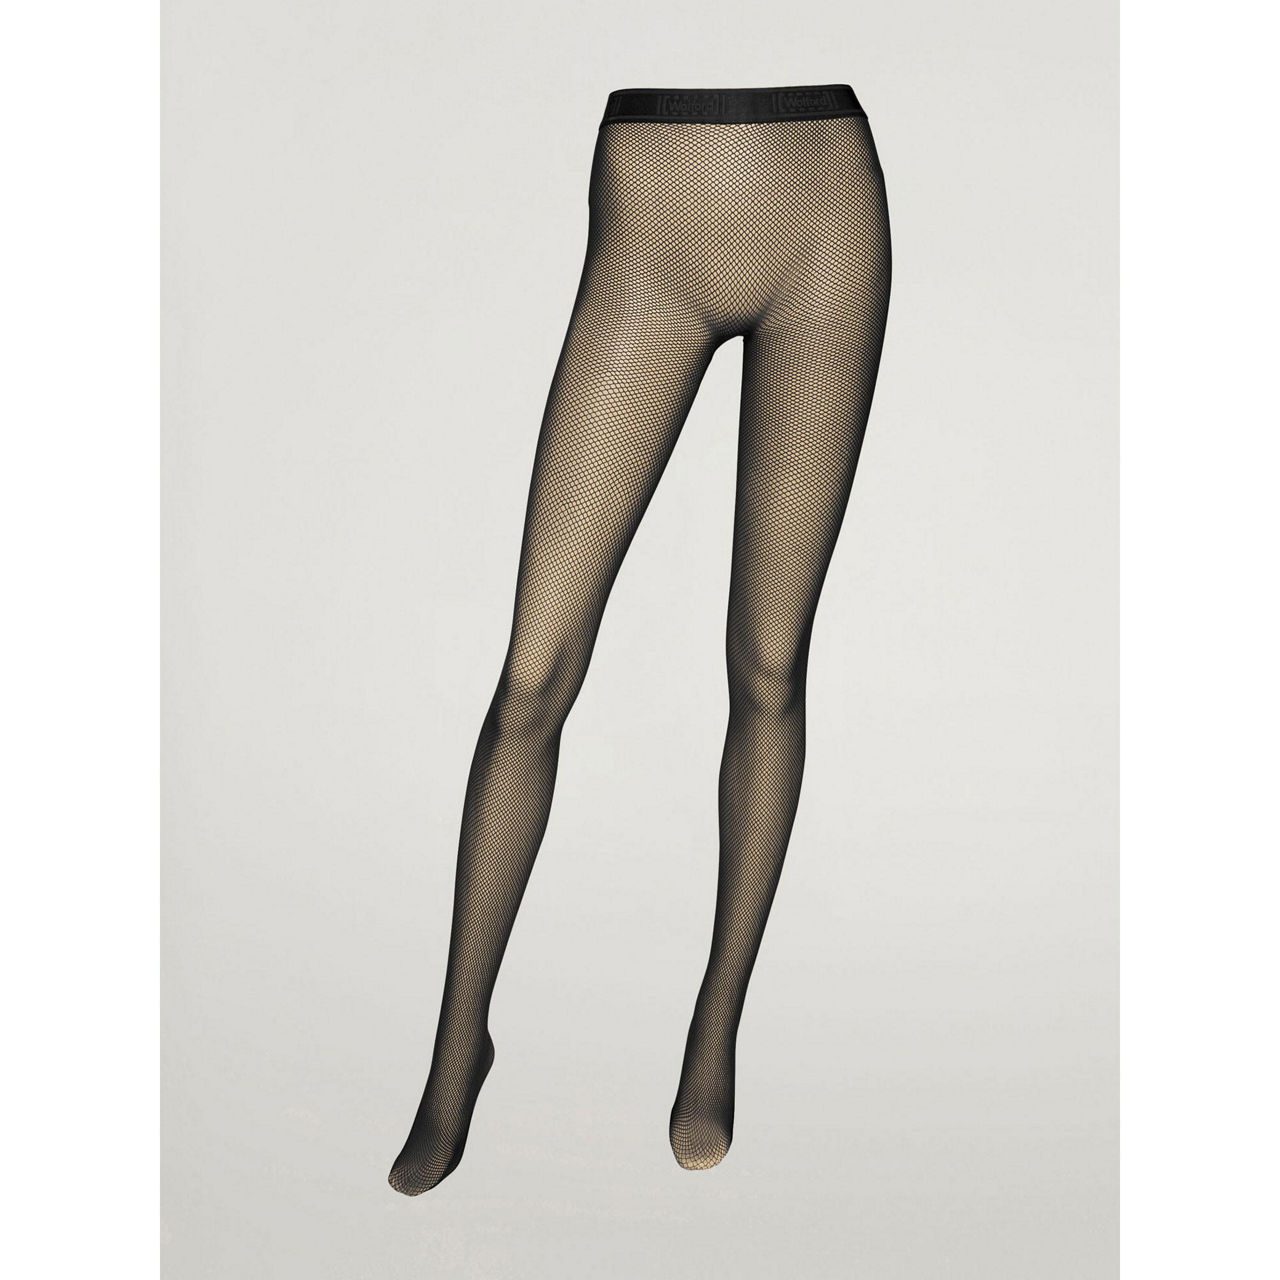 Wolford Stay-Hip Individual 12 Black Tights at The Hosiery Box Tights